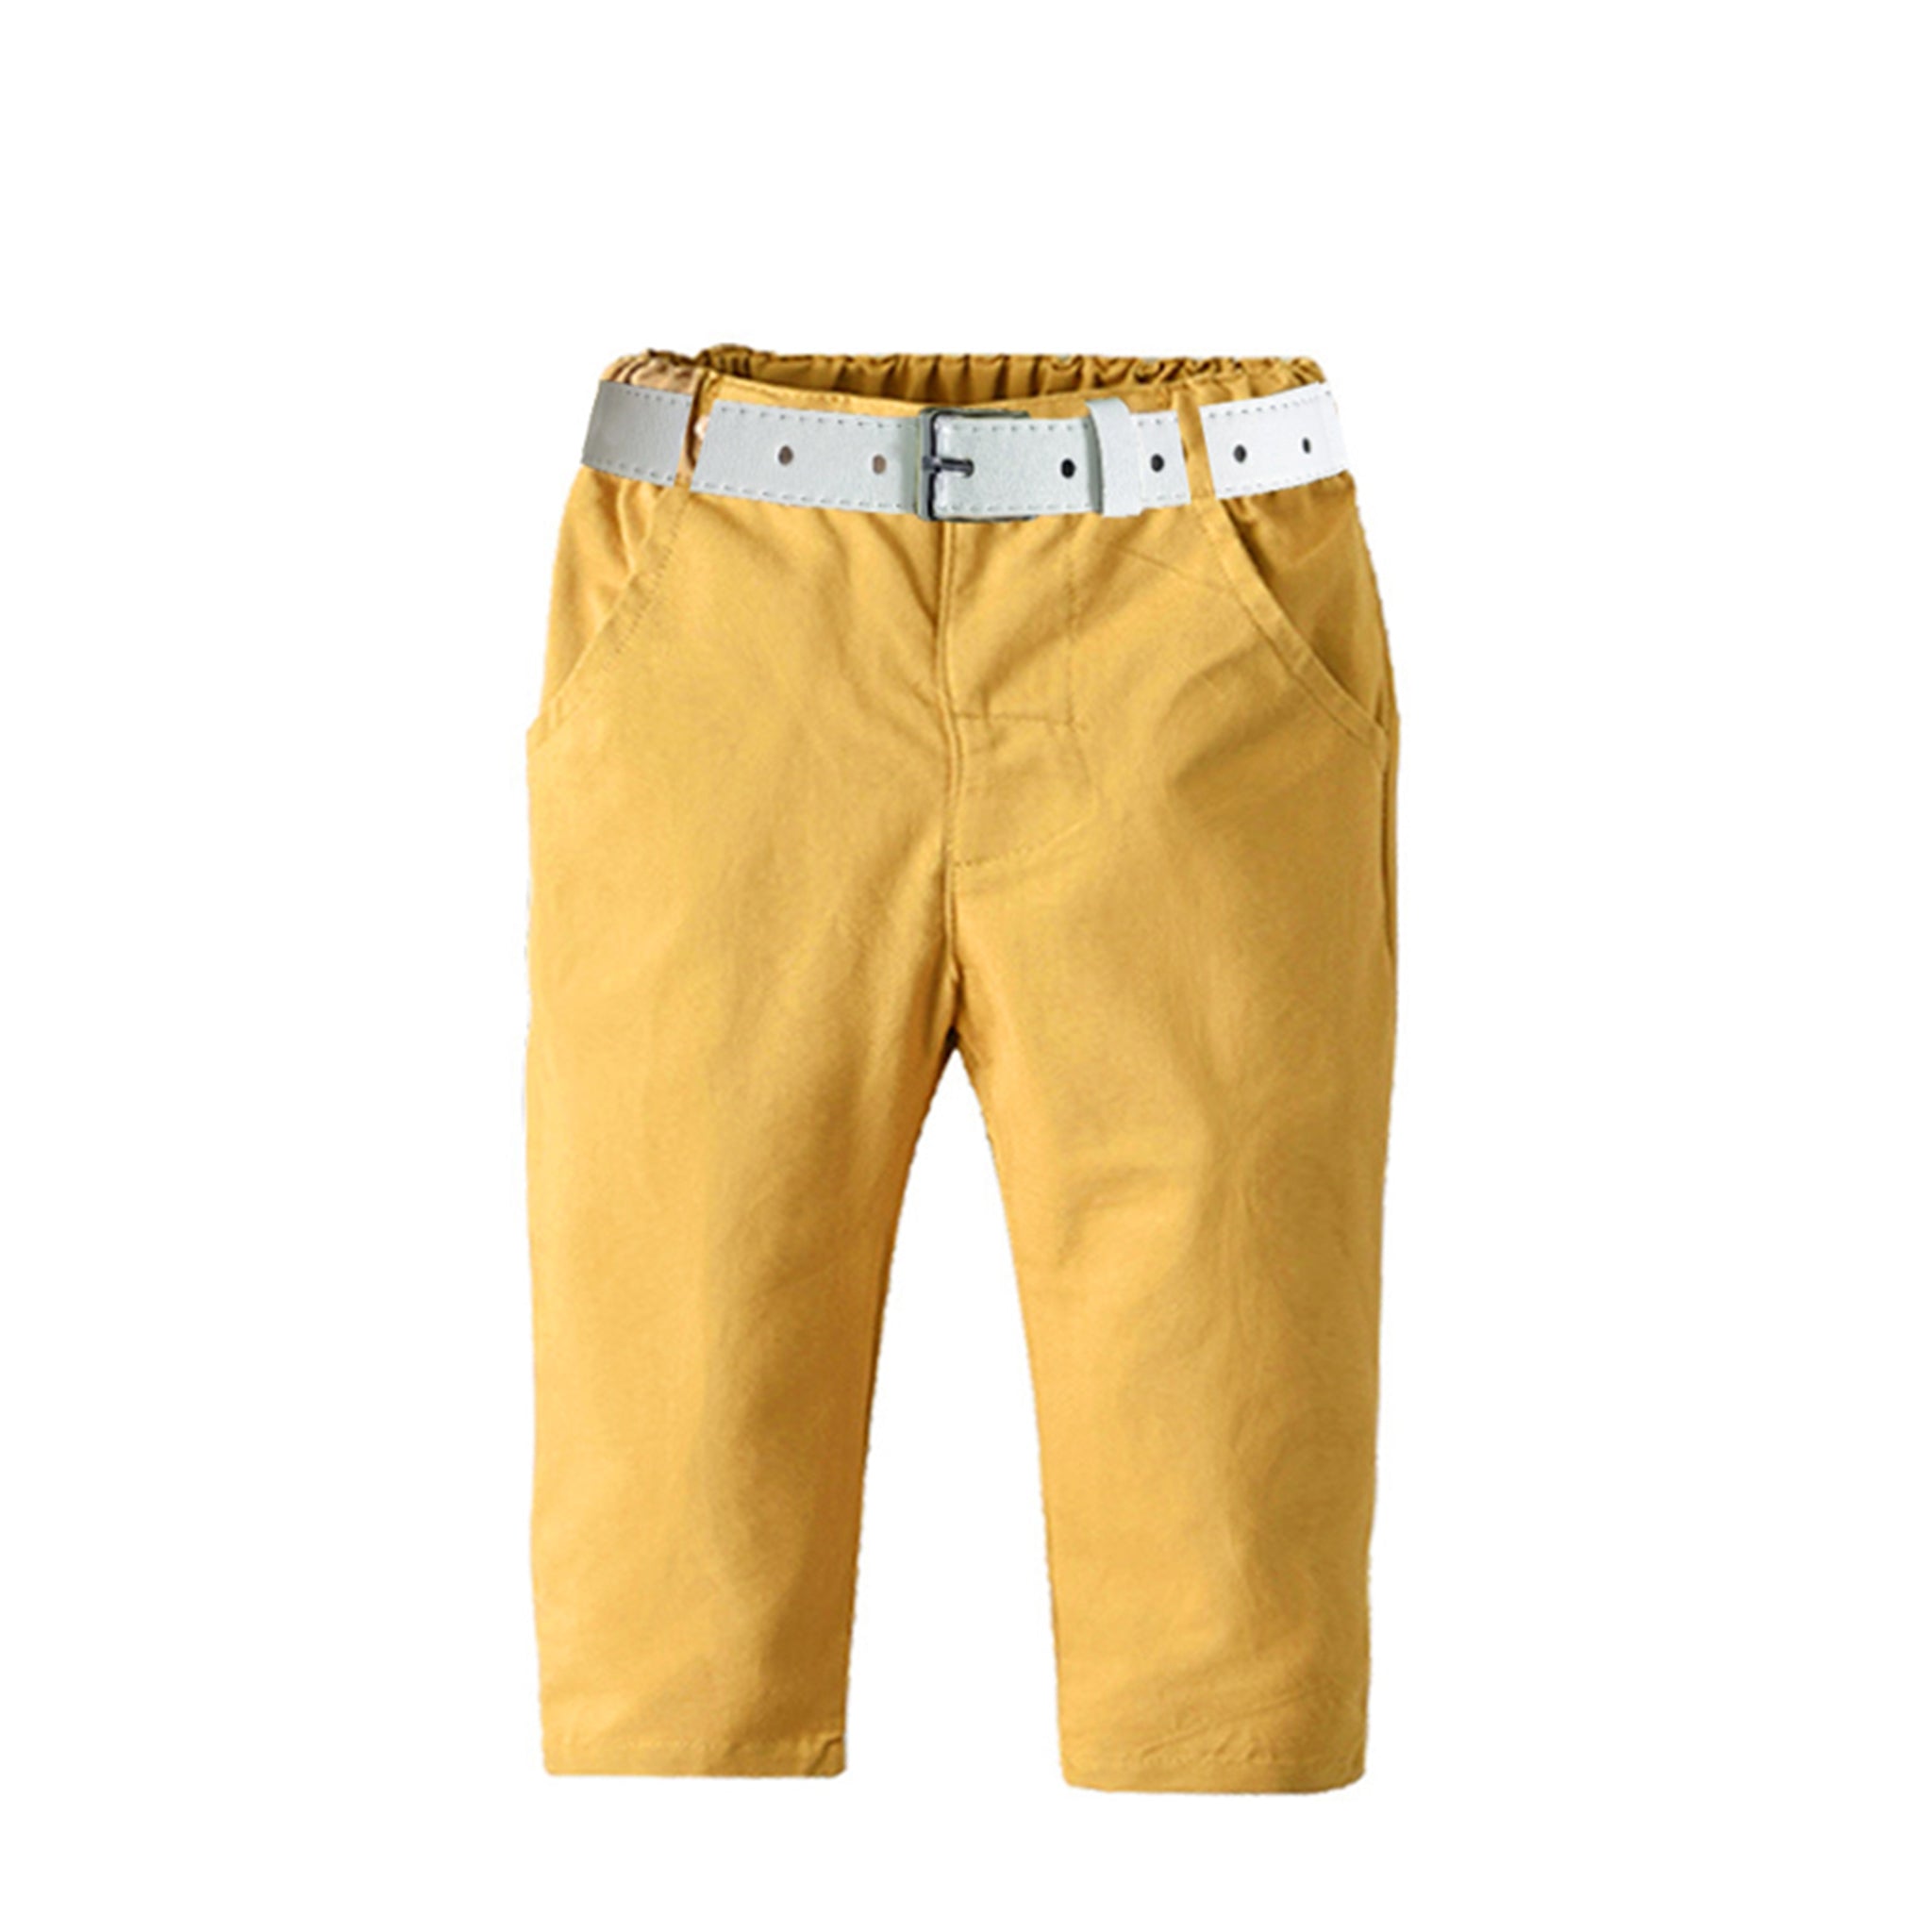 Boy Outfit Set for 1-7T,Bright Yellow Long Sleeve Shirt,Suits